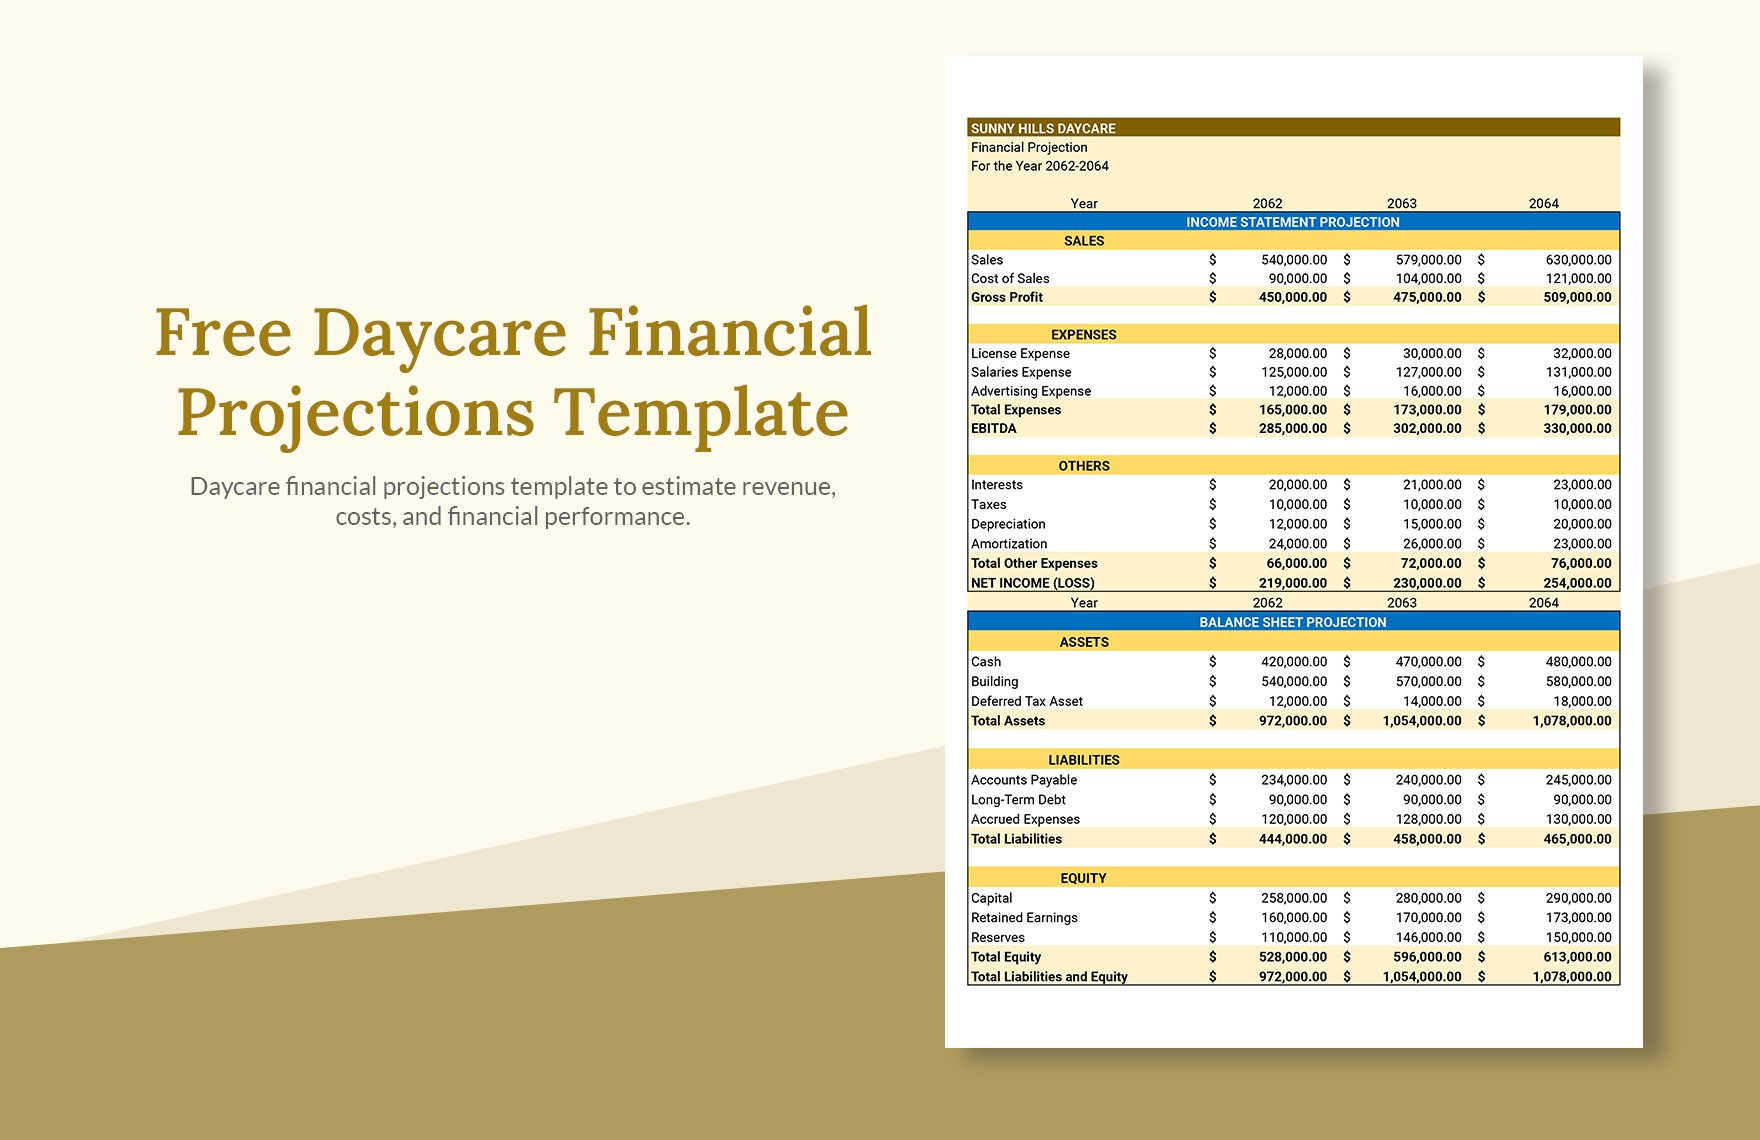 Daycare Financial Projections Template